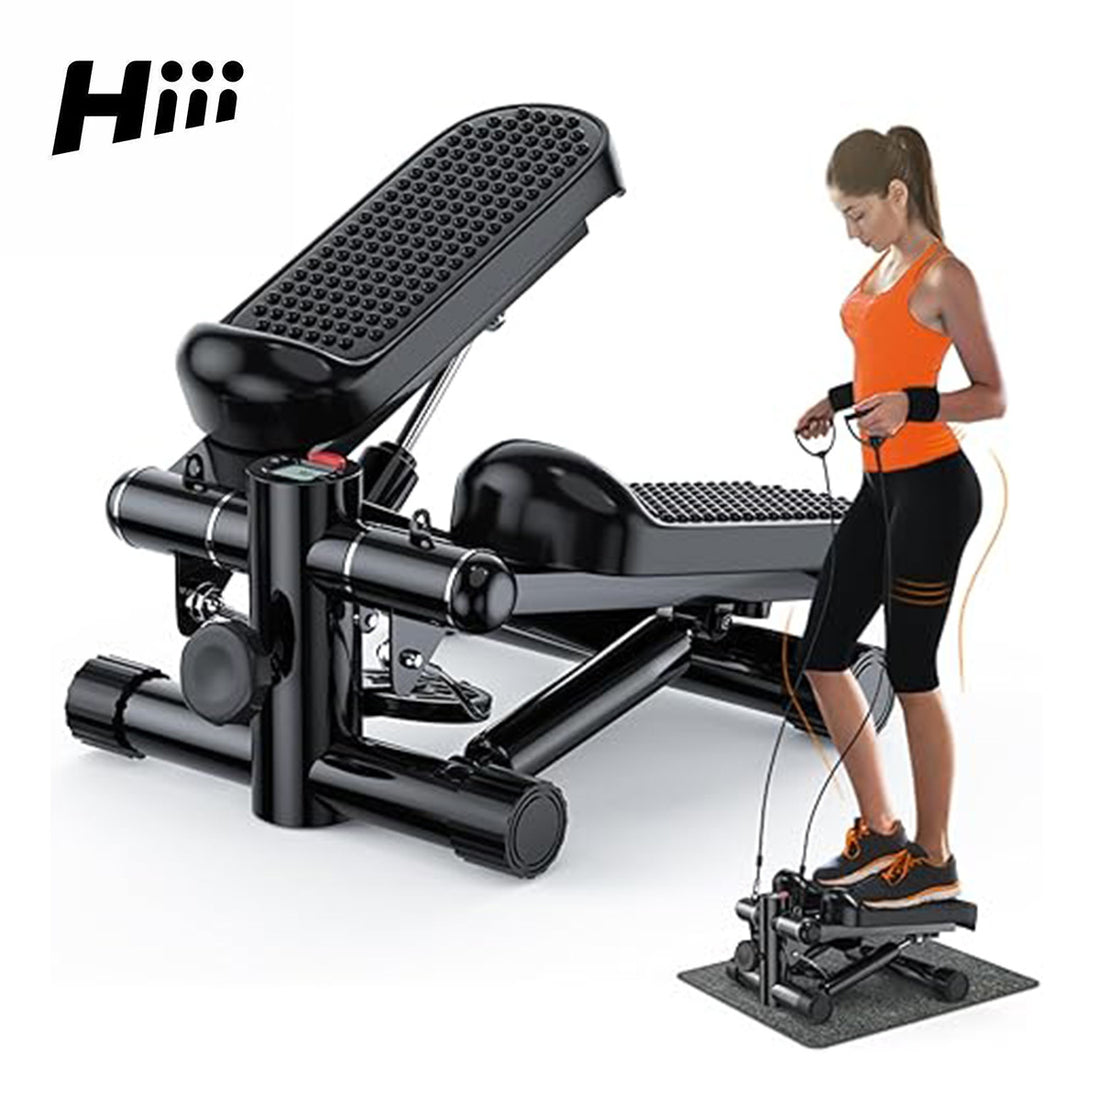 1pc,hiii,Steppers For Exercise At Home,Mini Stair Stepper 330 Lb Capacity,Workout Stepper Machine For Exercise,Mini Stepper With Resistance Bands